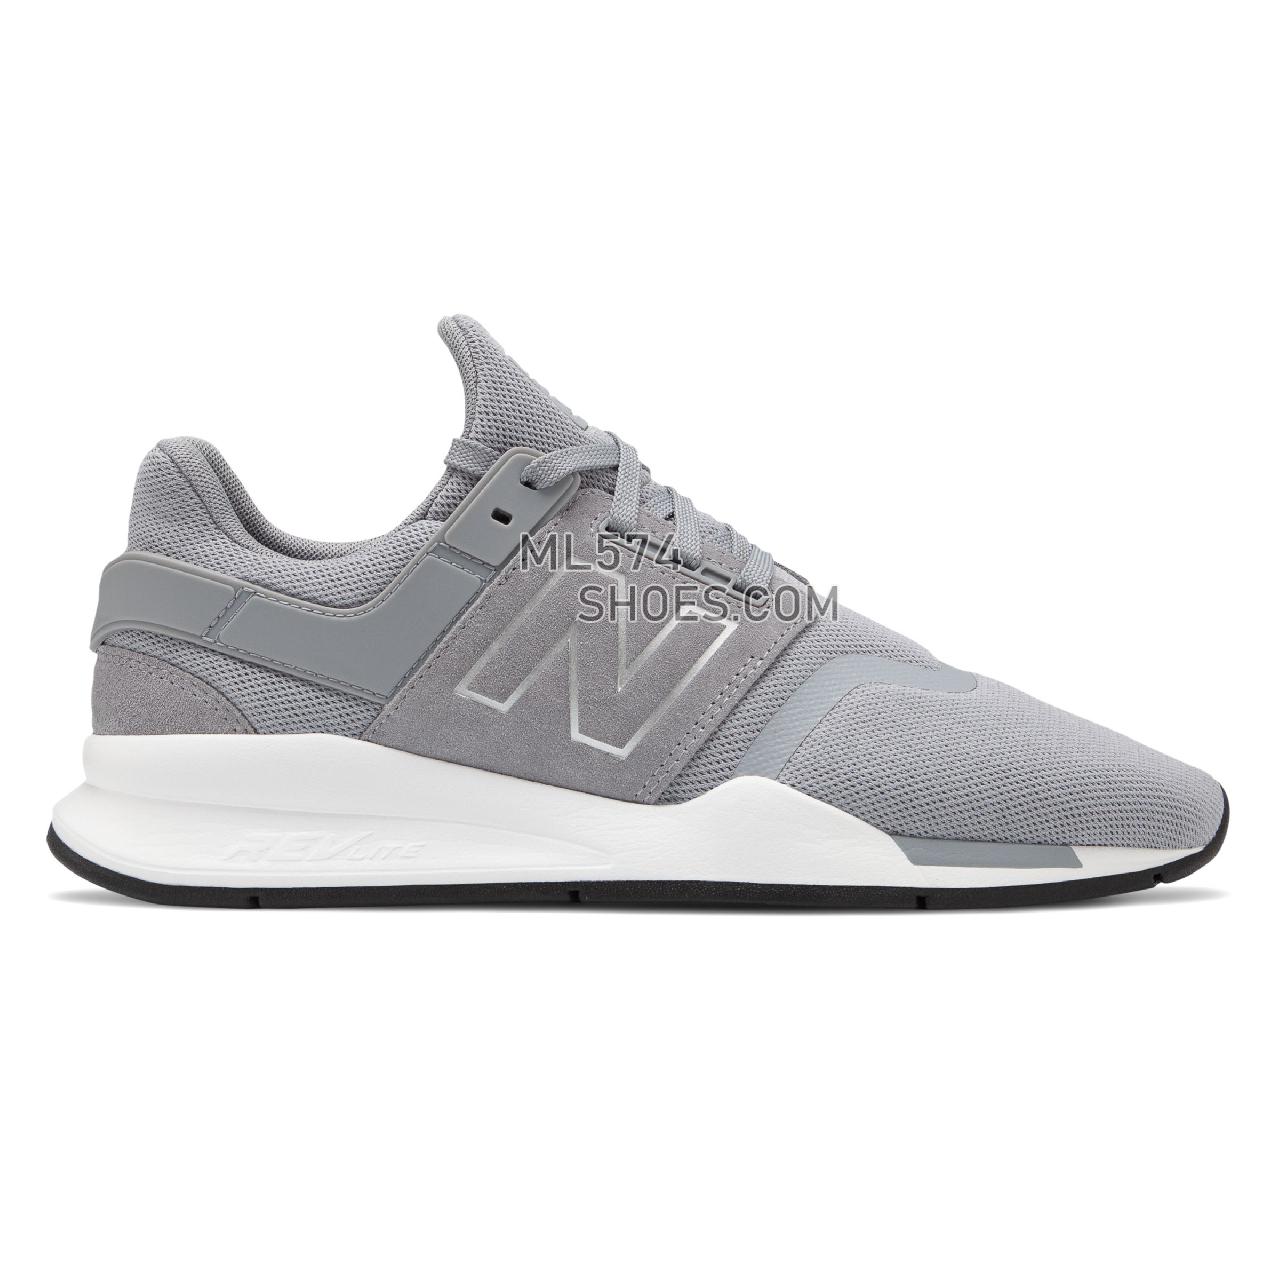 New Balance 247 - Men's 247 - Steel with Munsell White - MS247GK